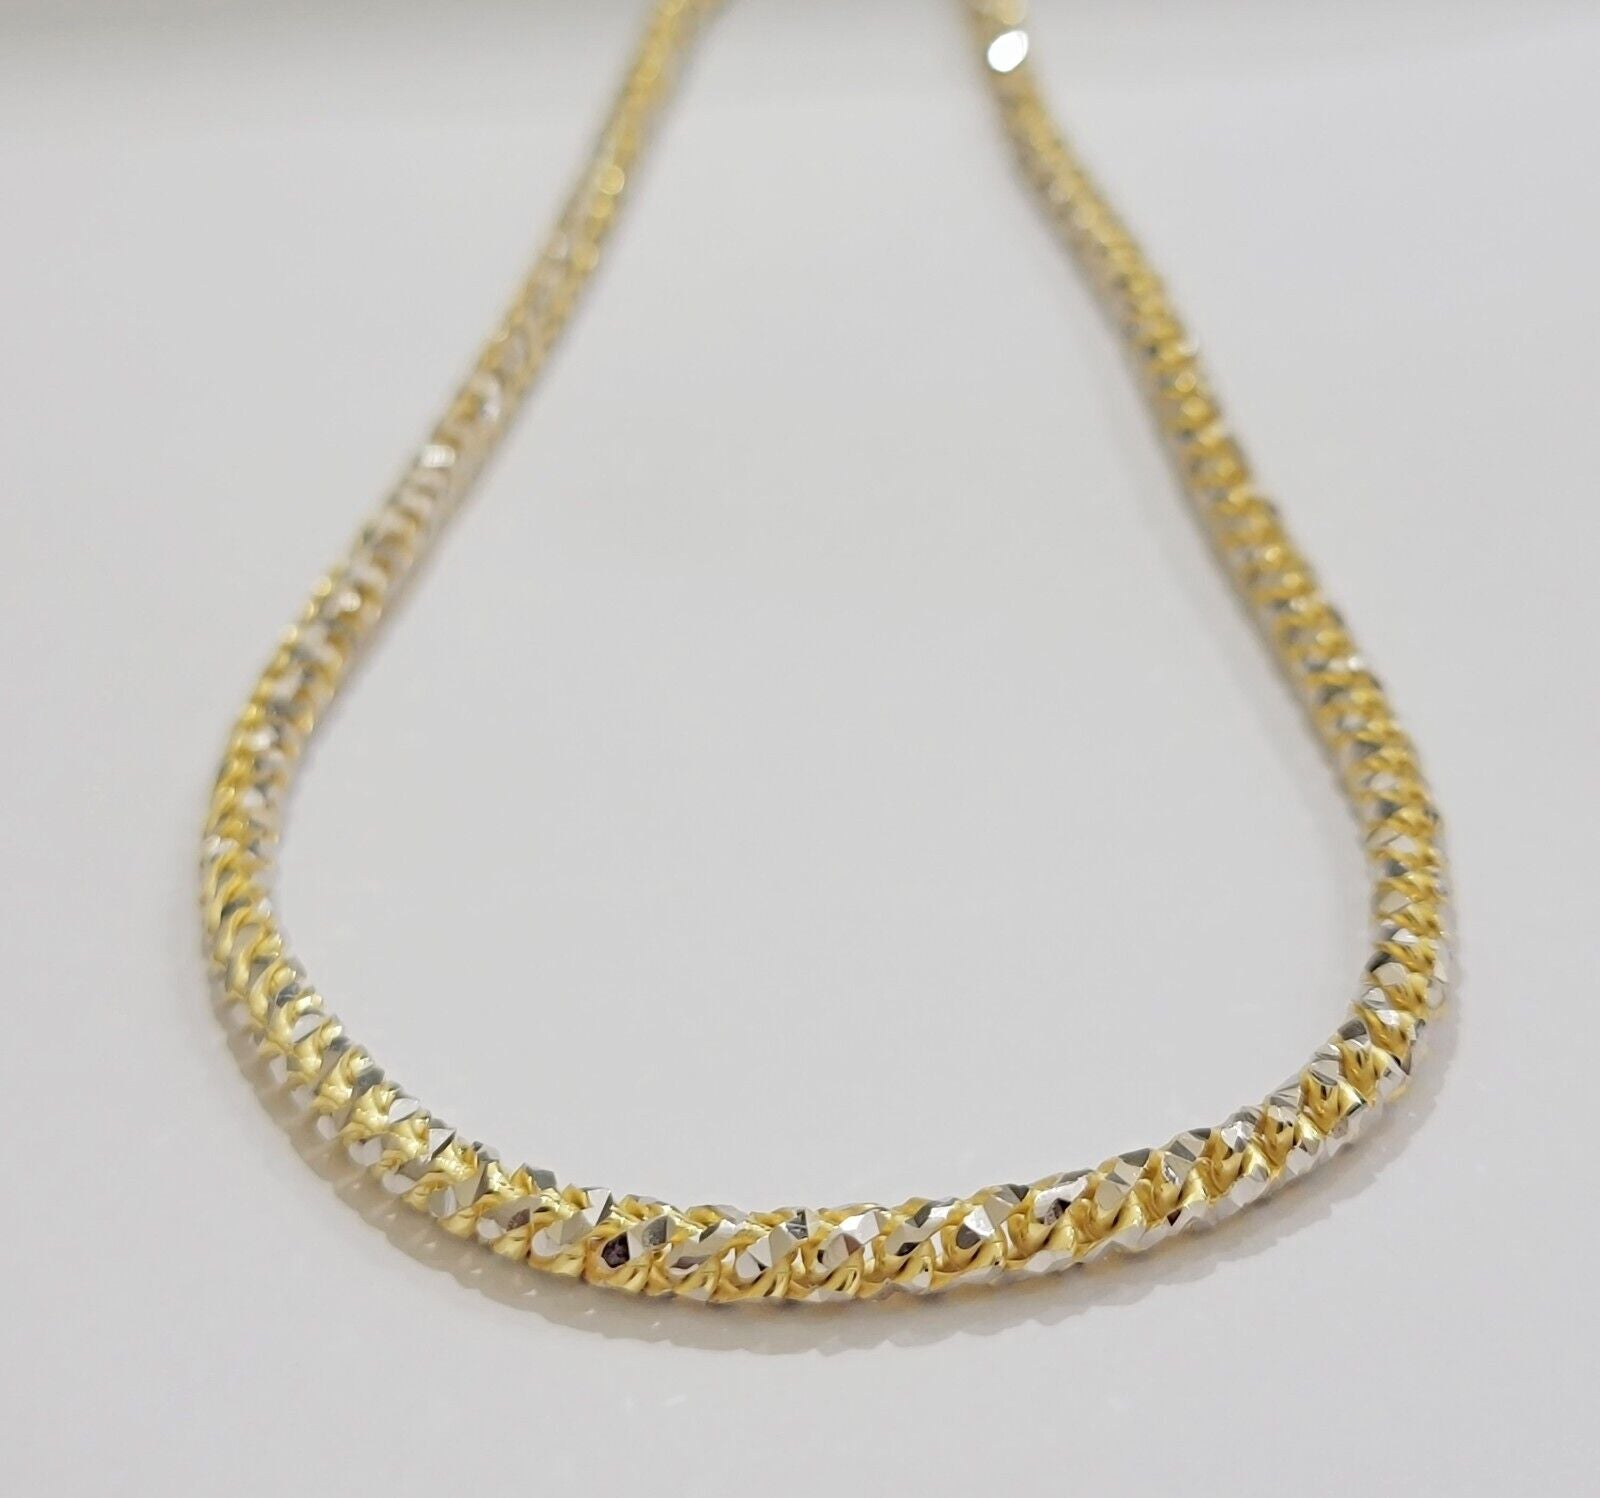 Real 10k Gold Solid Palm Chain Necklace Diamond cut 5mm 18